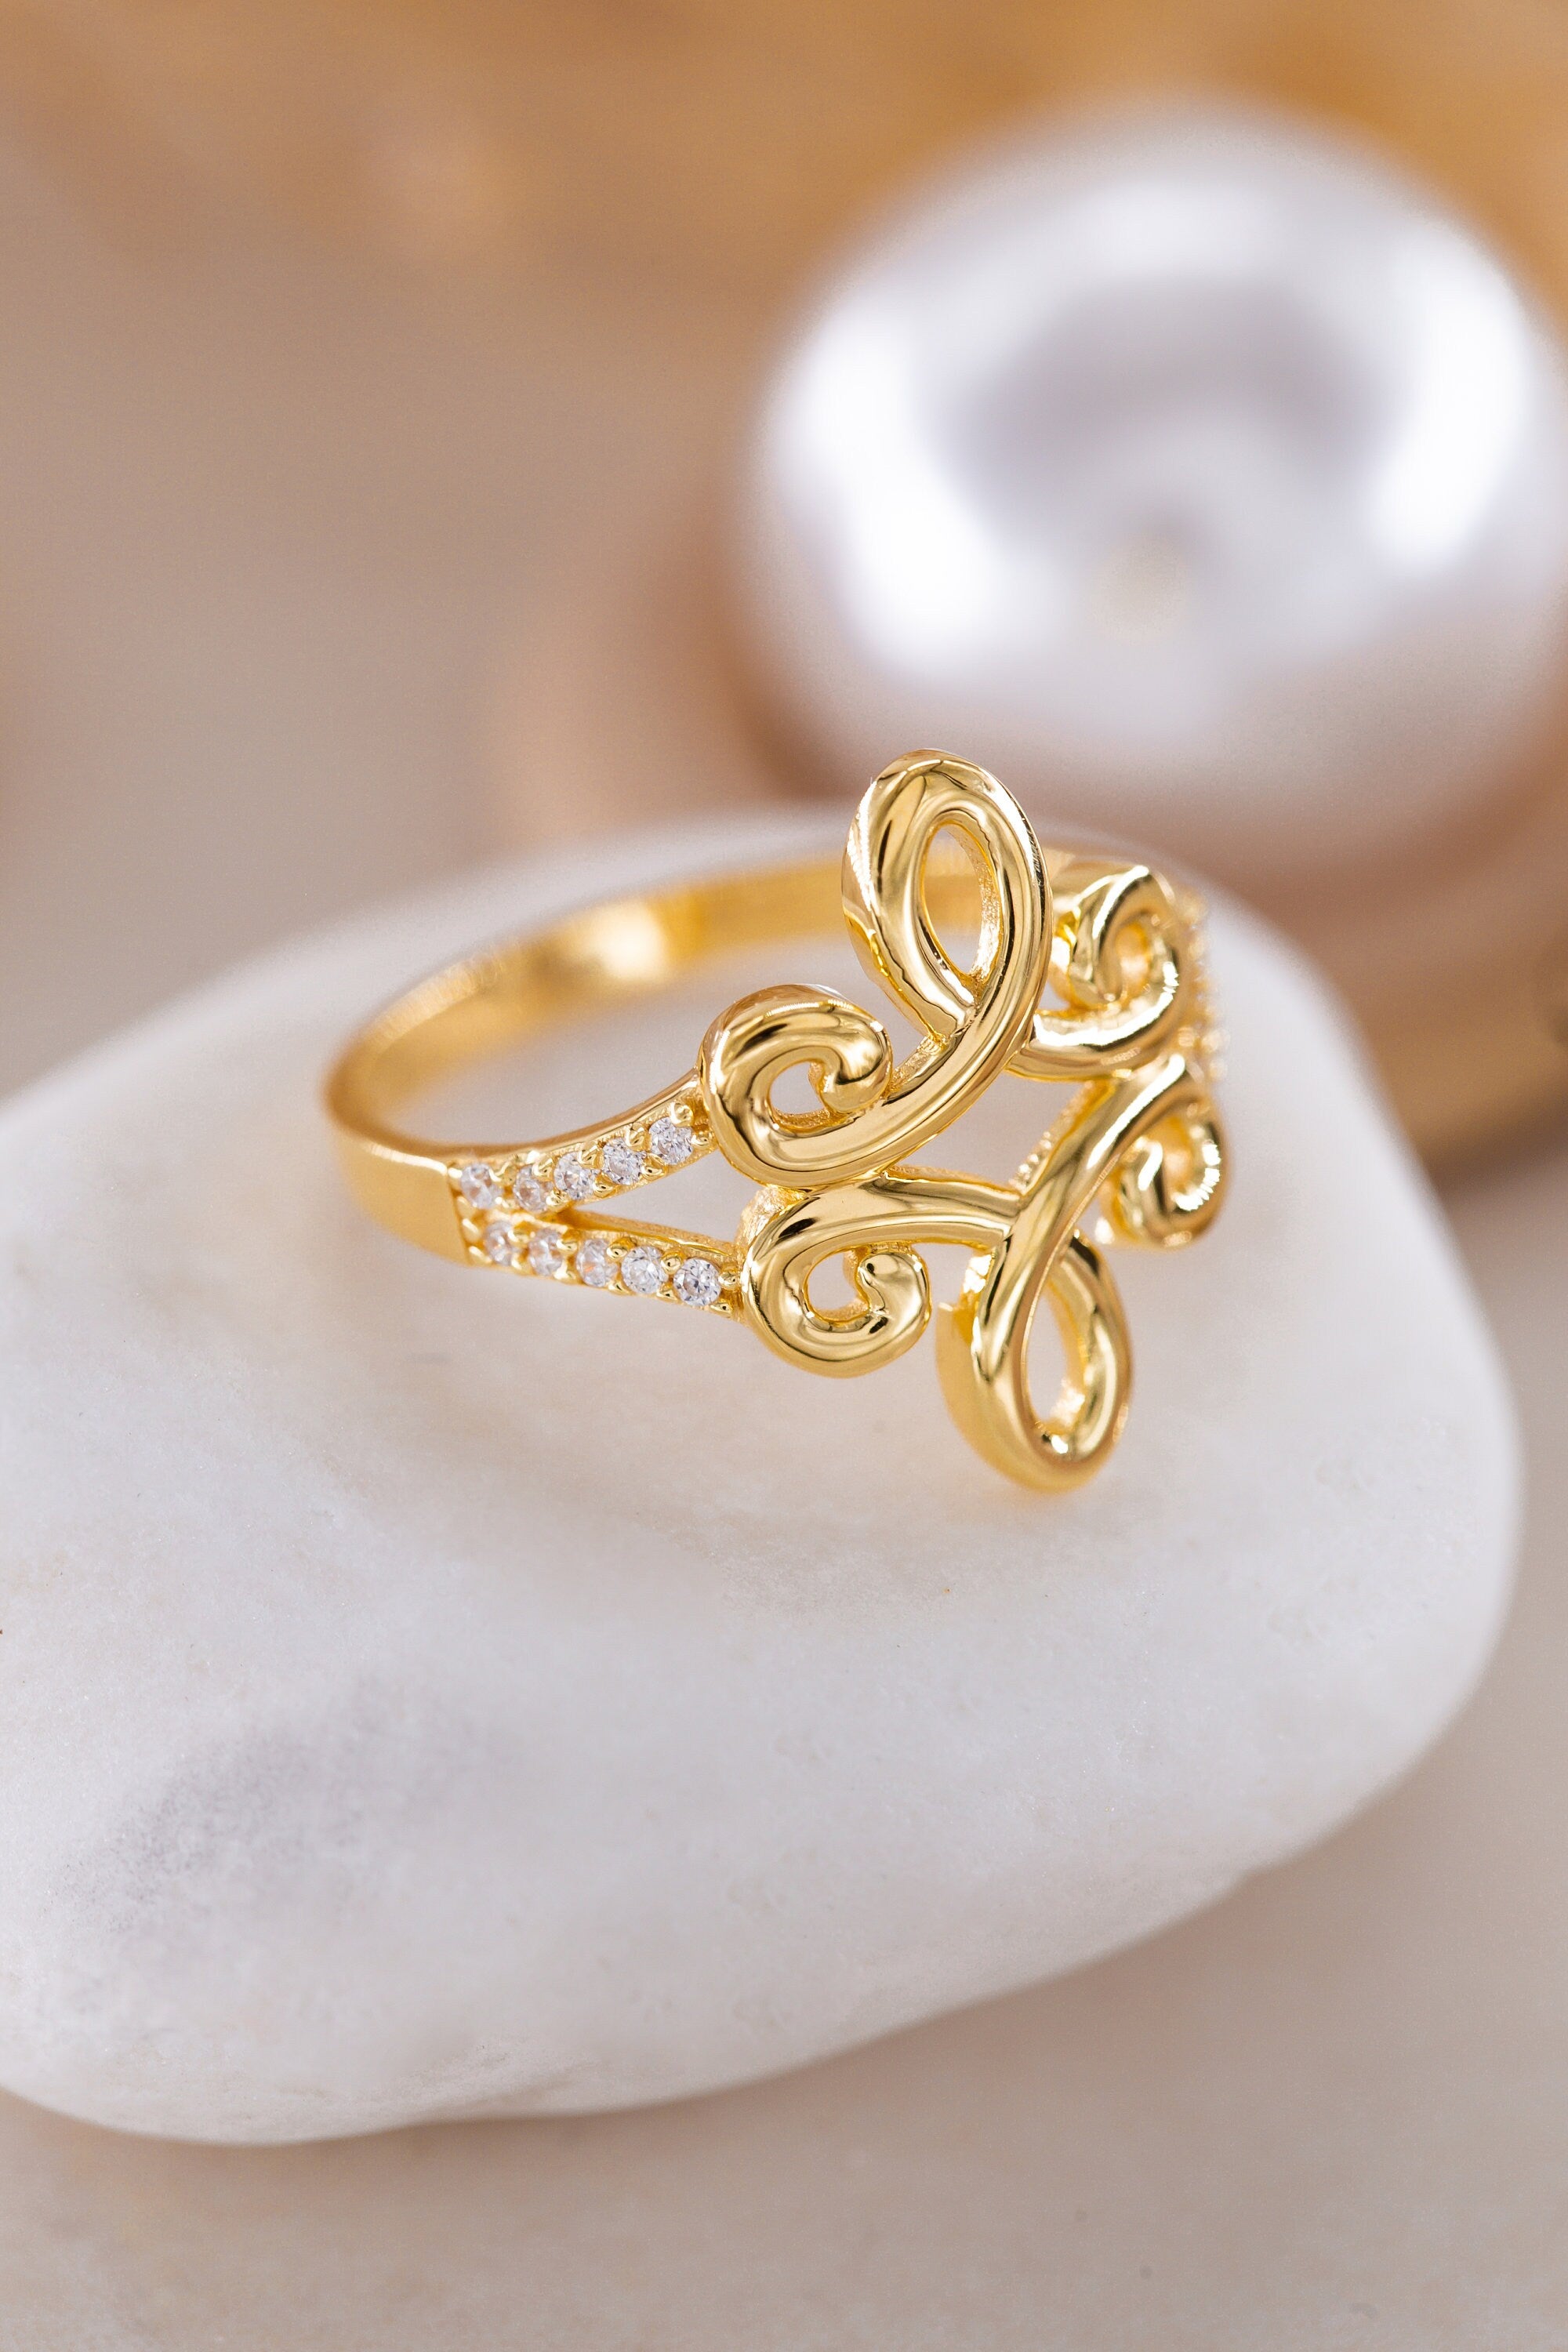 14K Golden Circular Ring, Spiral Symbol 925 Silver Ring / Ring For Lovers / Engagement Ring / Handmade Spiral Ring /Gift for Mothers